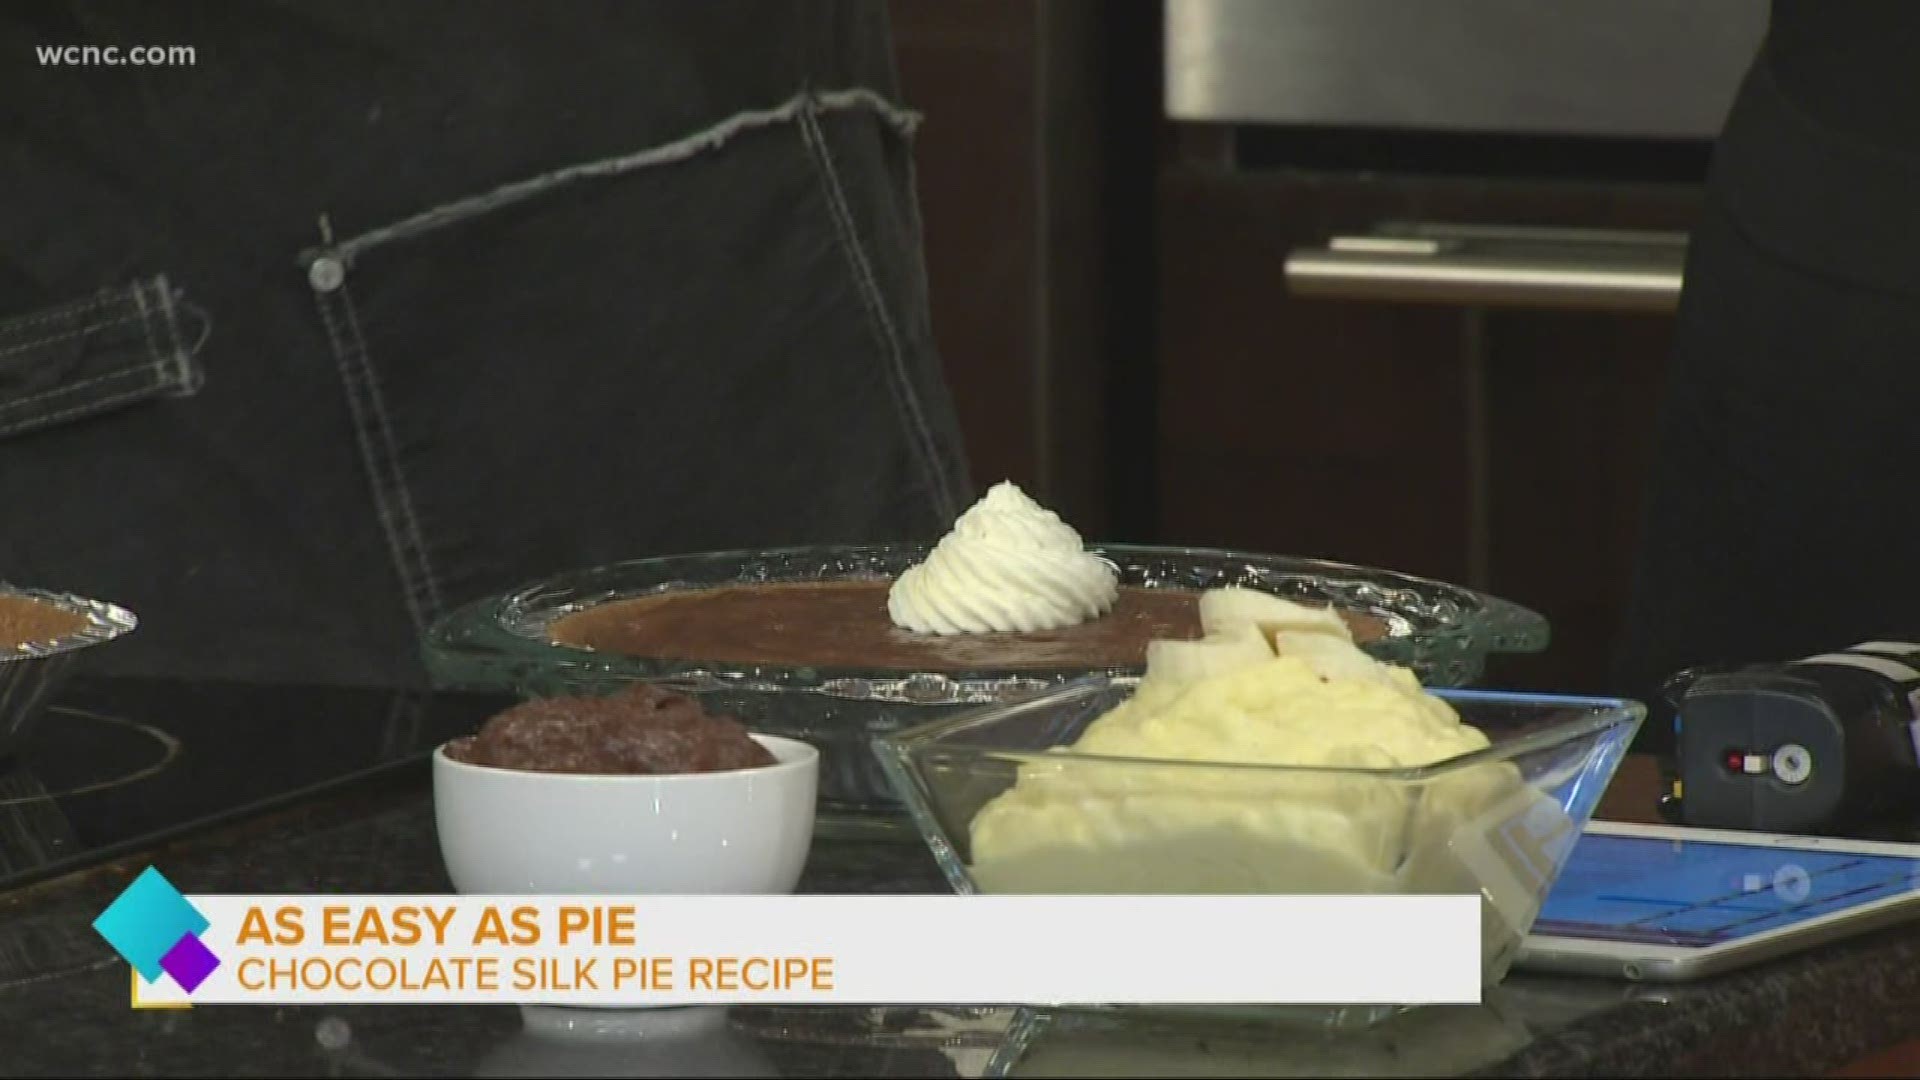 This super easy chocolate silk pie recipe can be whipped up in no time!